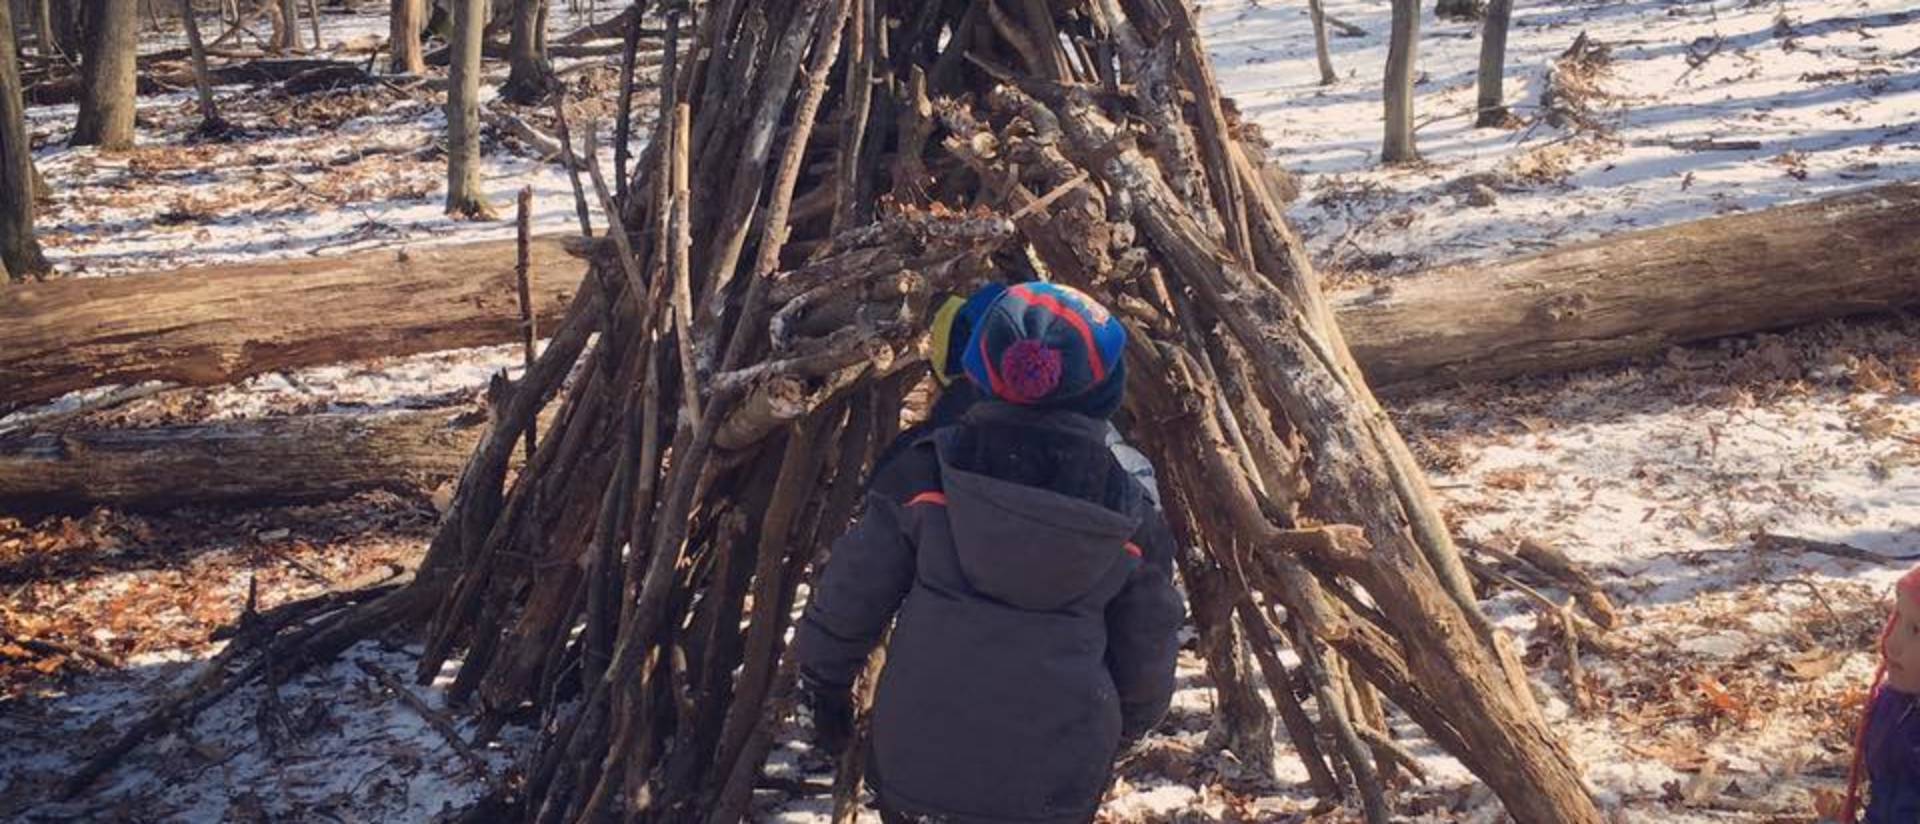 Kids at the children's nature academy building a fort